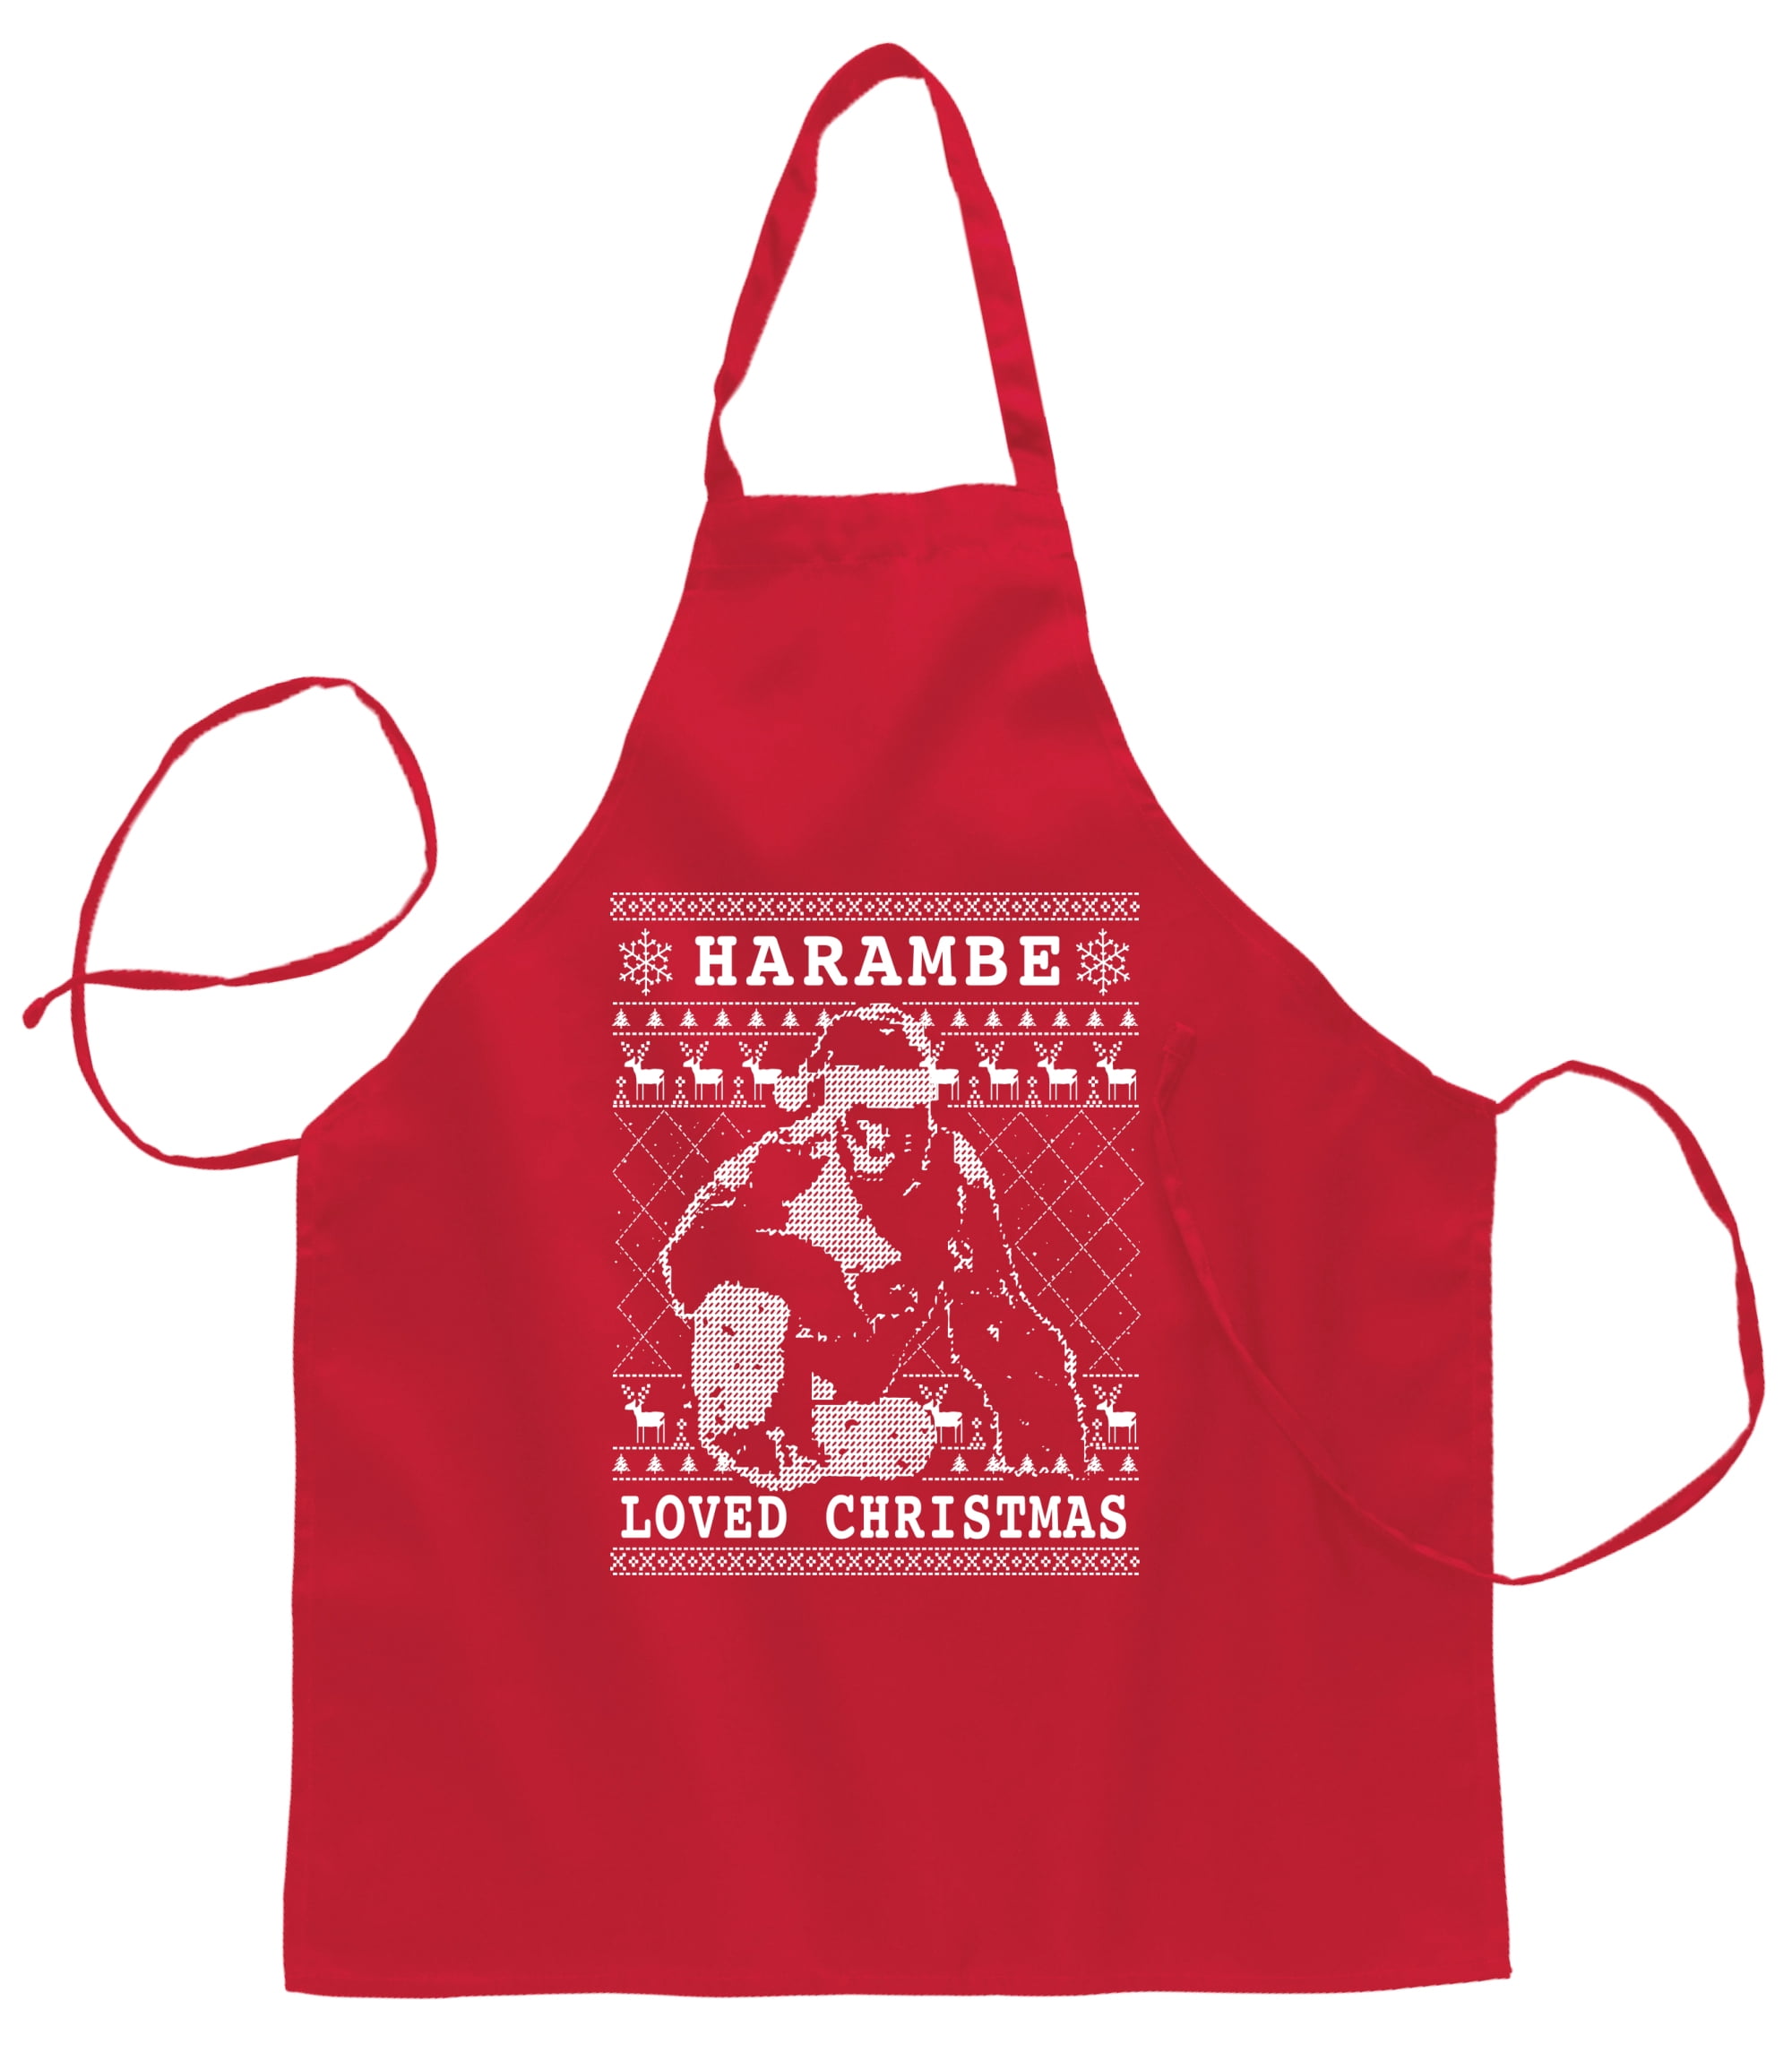 Awesome Butcher Funny Novelty Apron Kitchen Cooking 